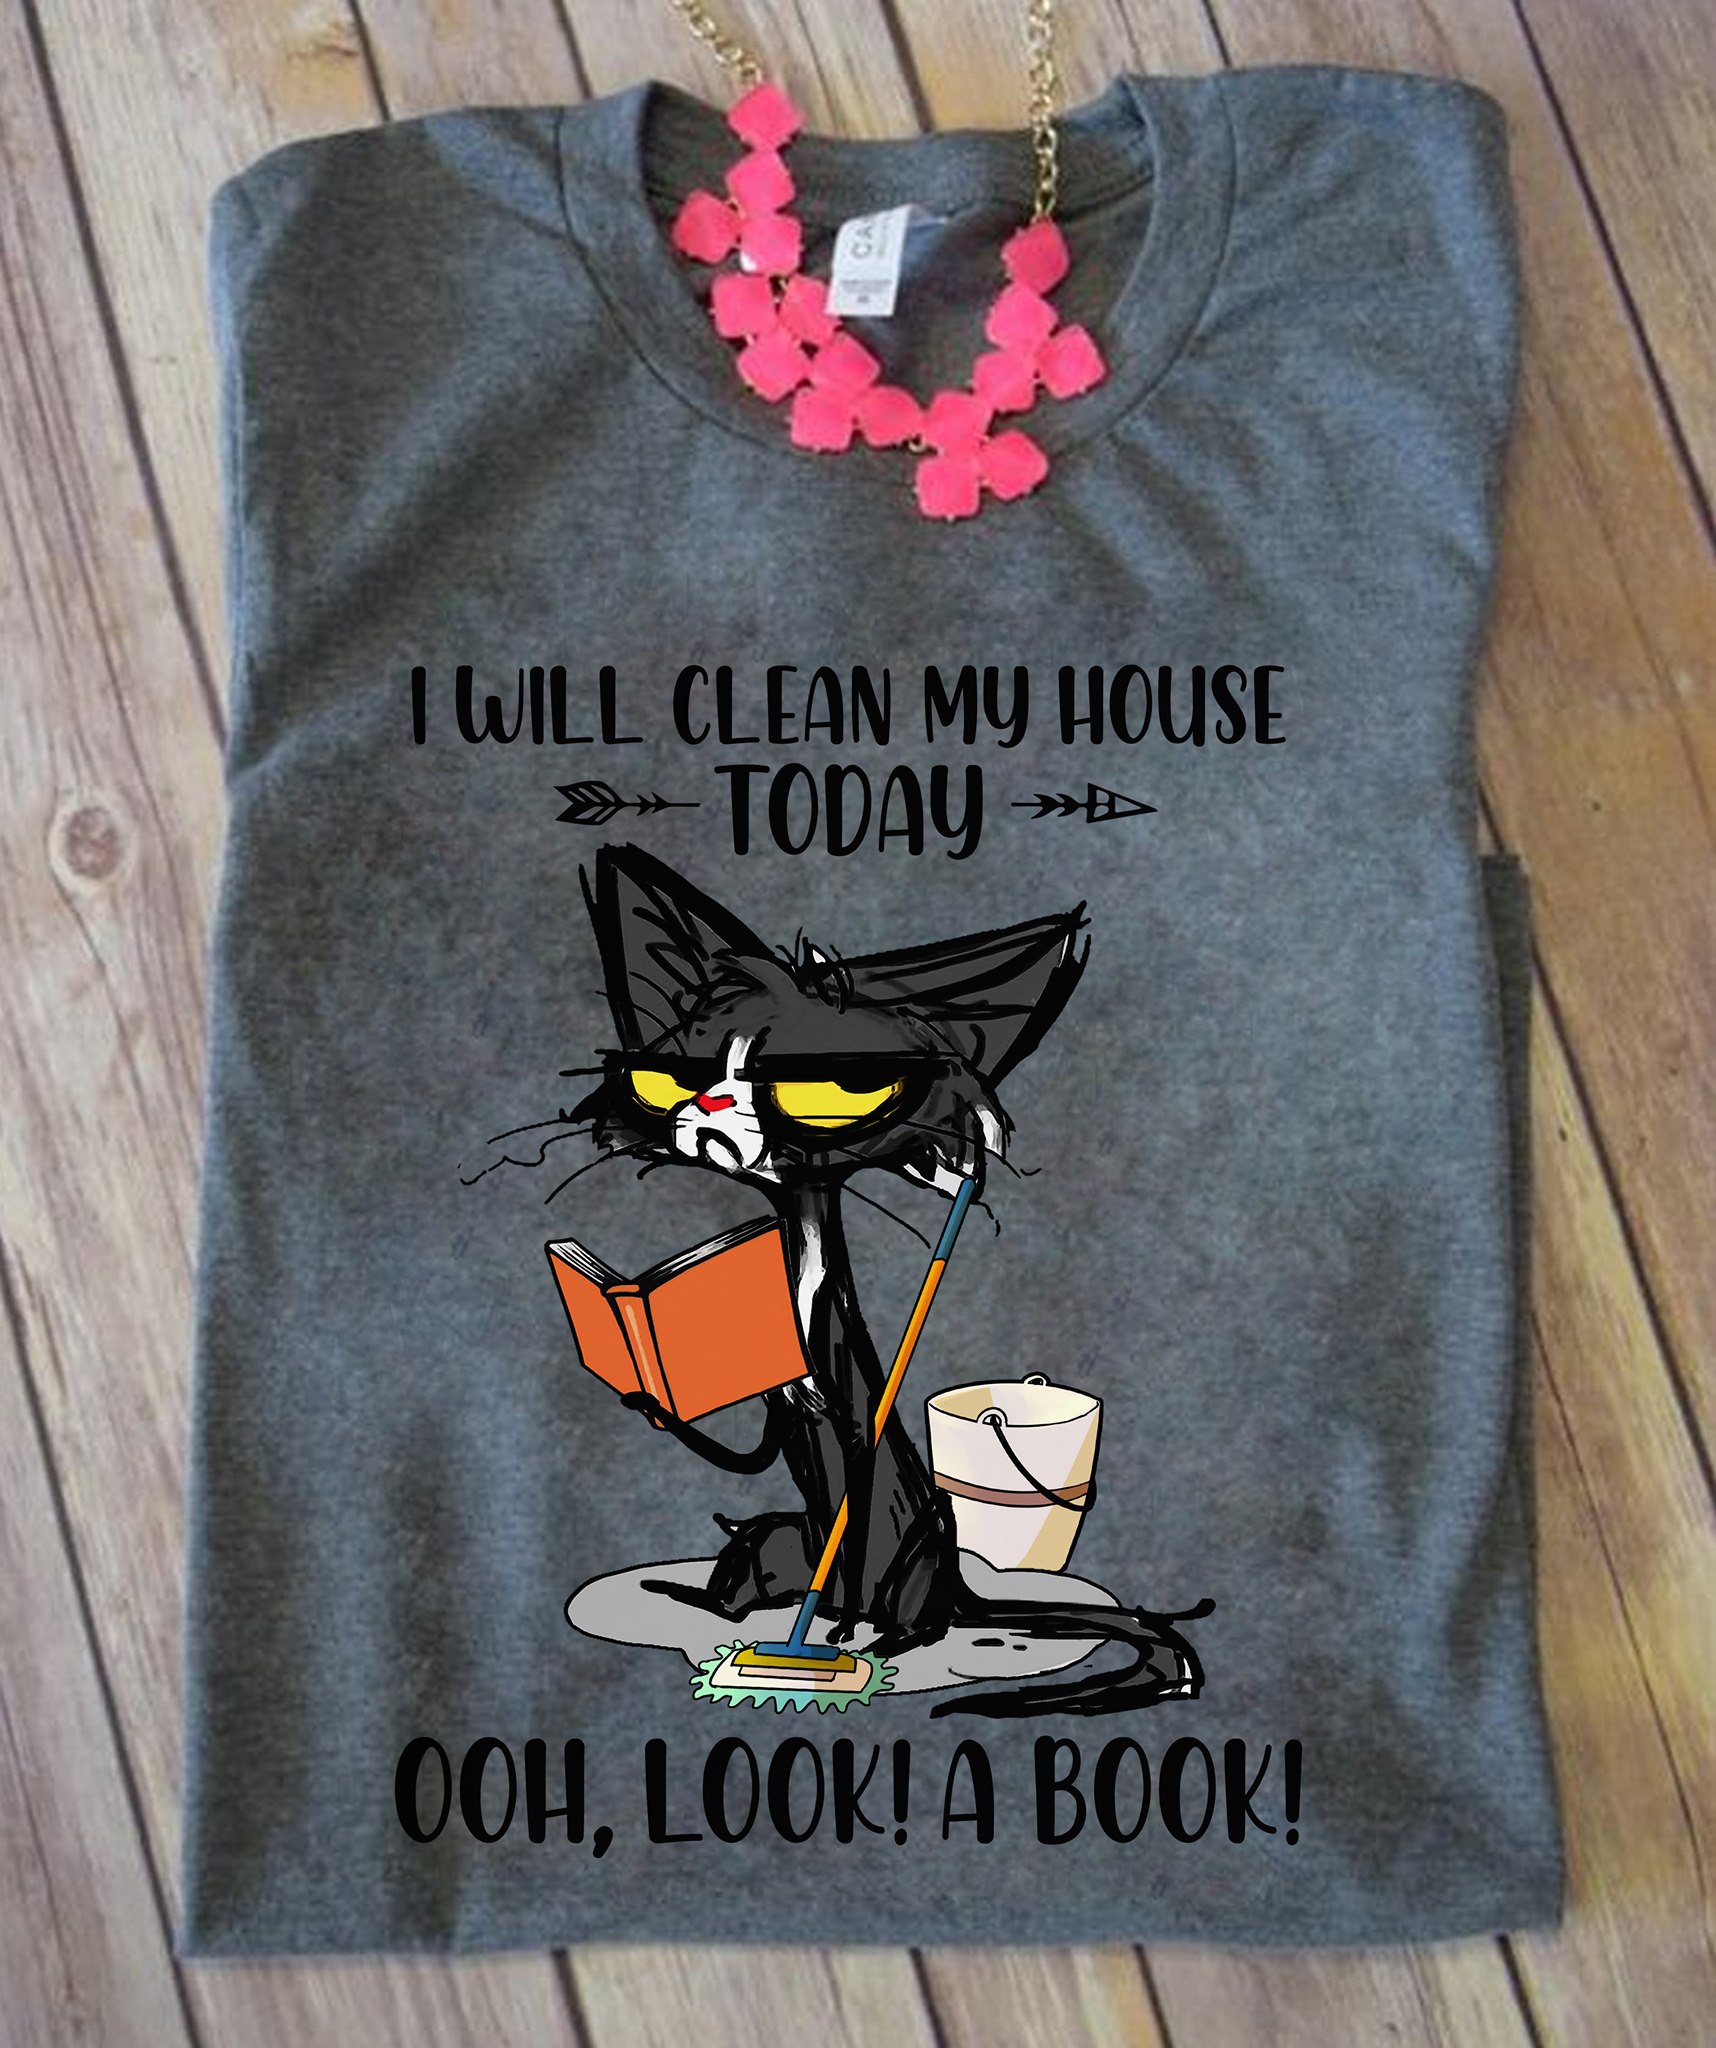 I will clean my house today Ooh, Look a book! Black cat